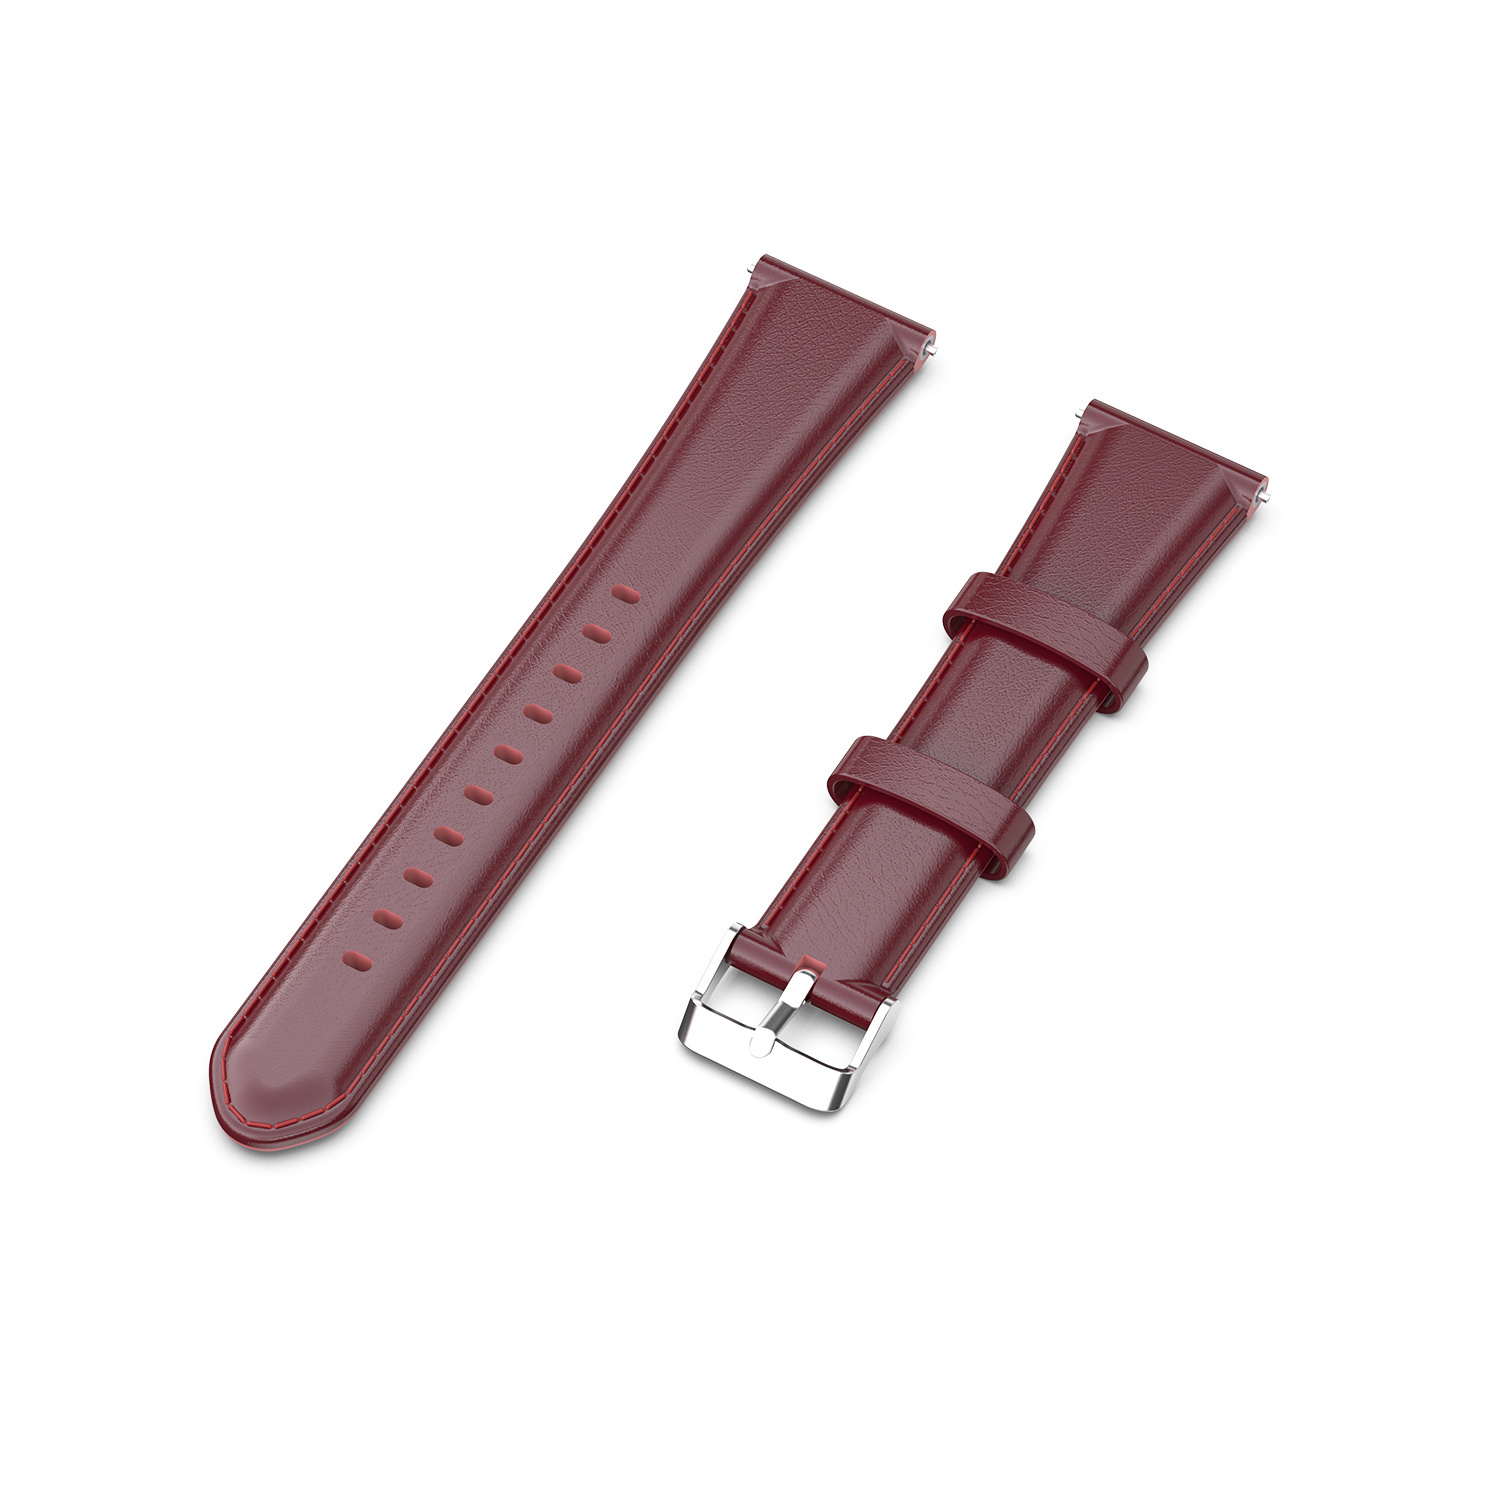 Huawei Watch Gt Leather Strap - Wine Red